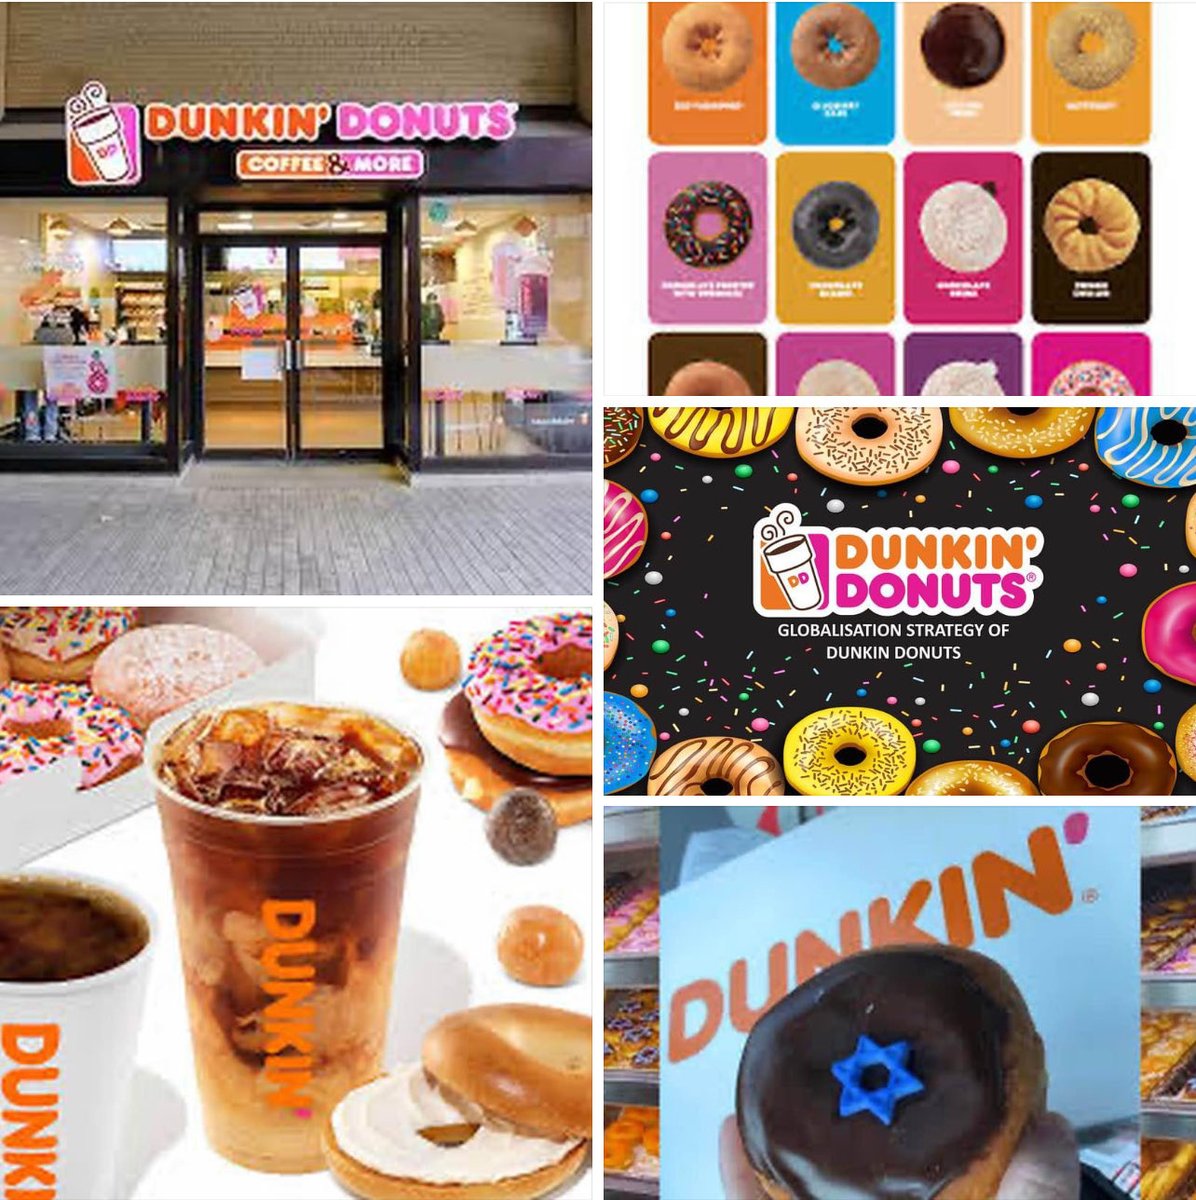 Feeling lucky? Dunkin Donuts generously donated gift certificates as raffle prizes for the Hanukkah 8 Krazy Kilometers and 2K Latke Loop. They also donated yummy donuts and coffee for our participants to enjoy.#Hanukkah #Chanukah #Christmas #holidayrun  #2k #5k #8k #dunkindonuts